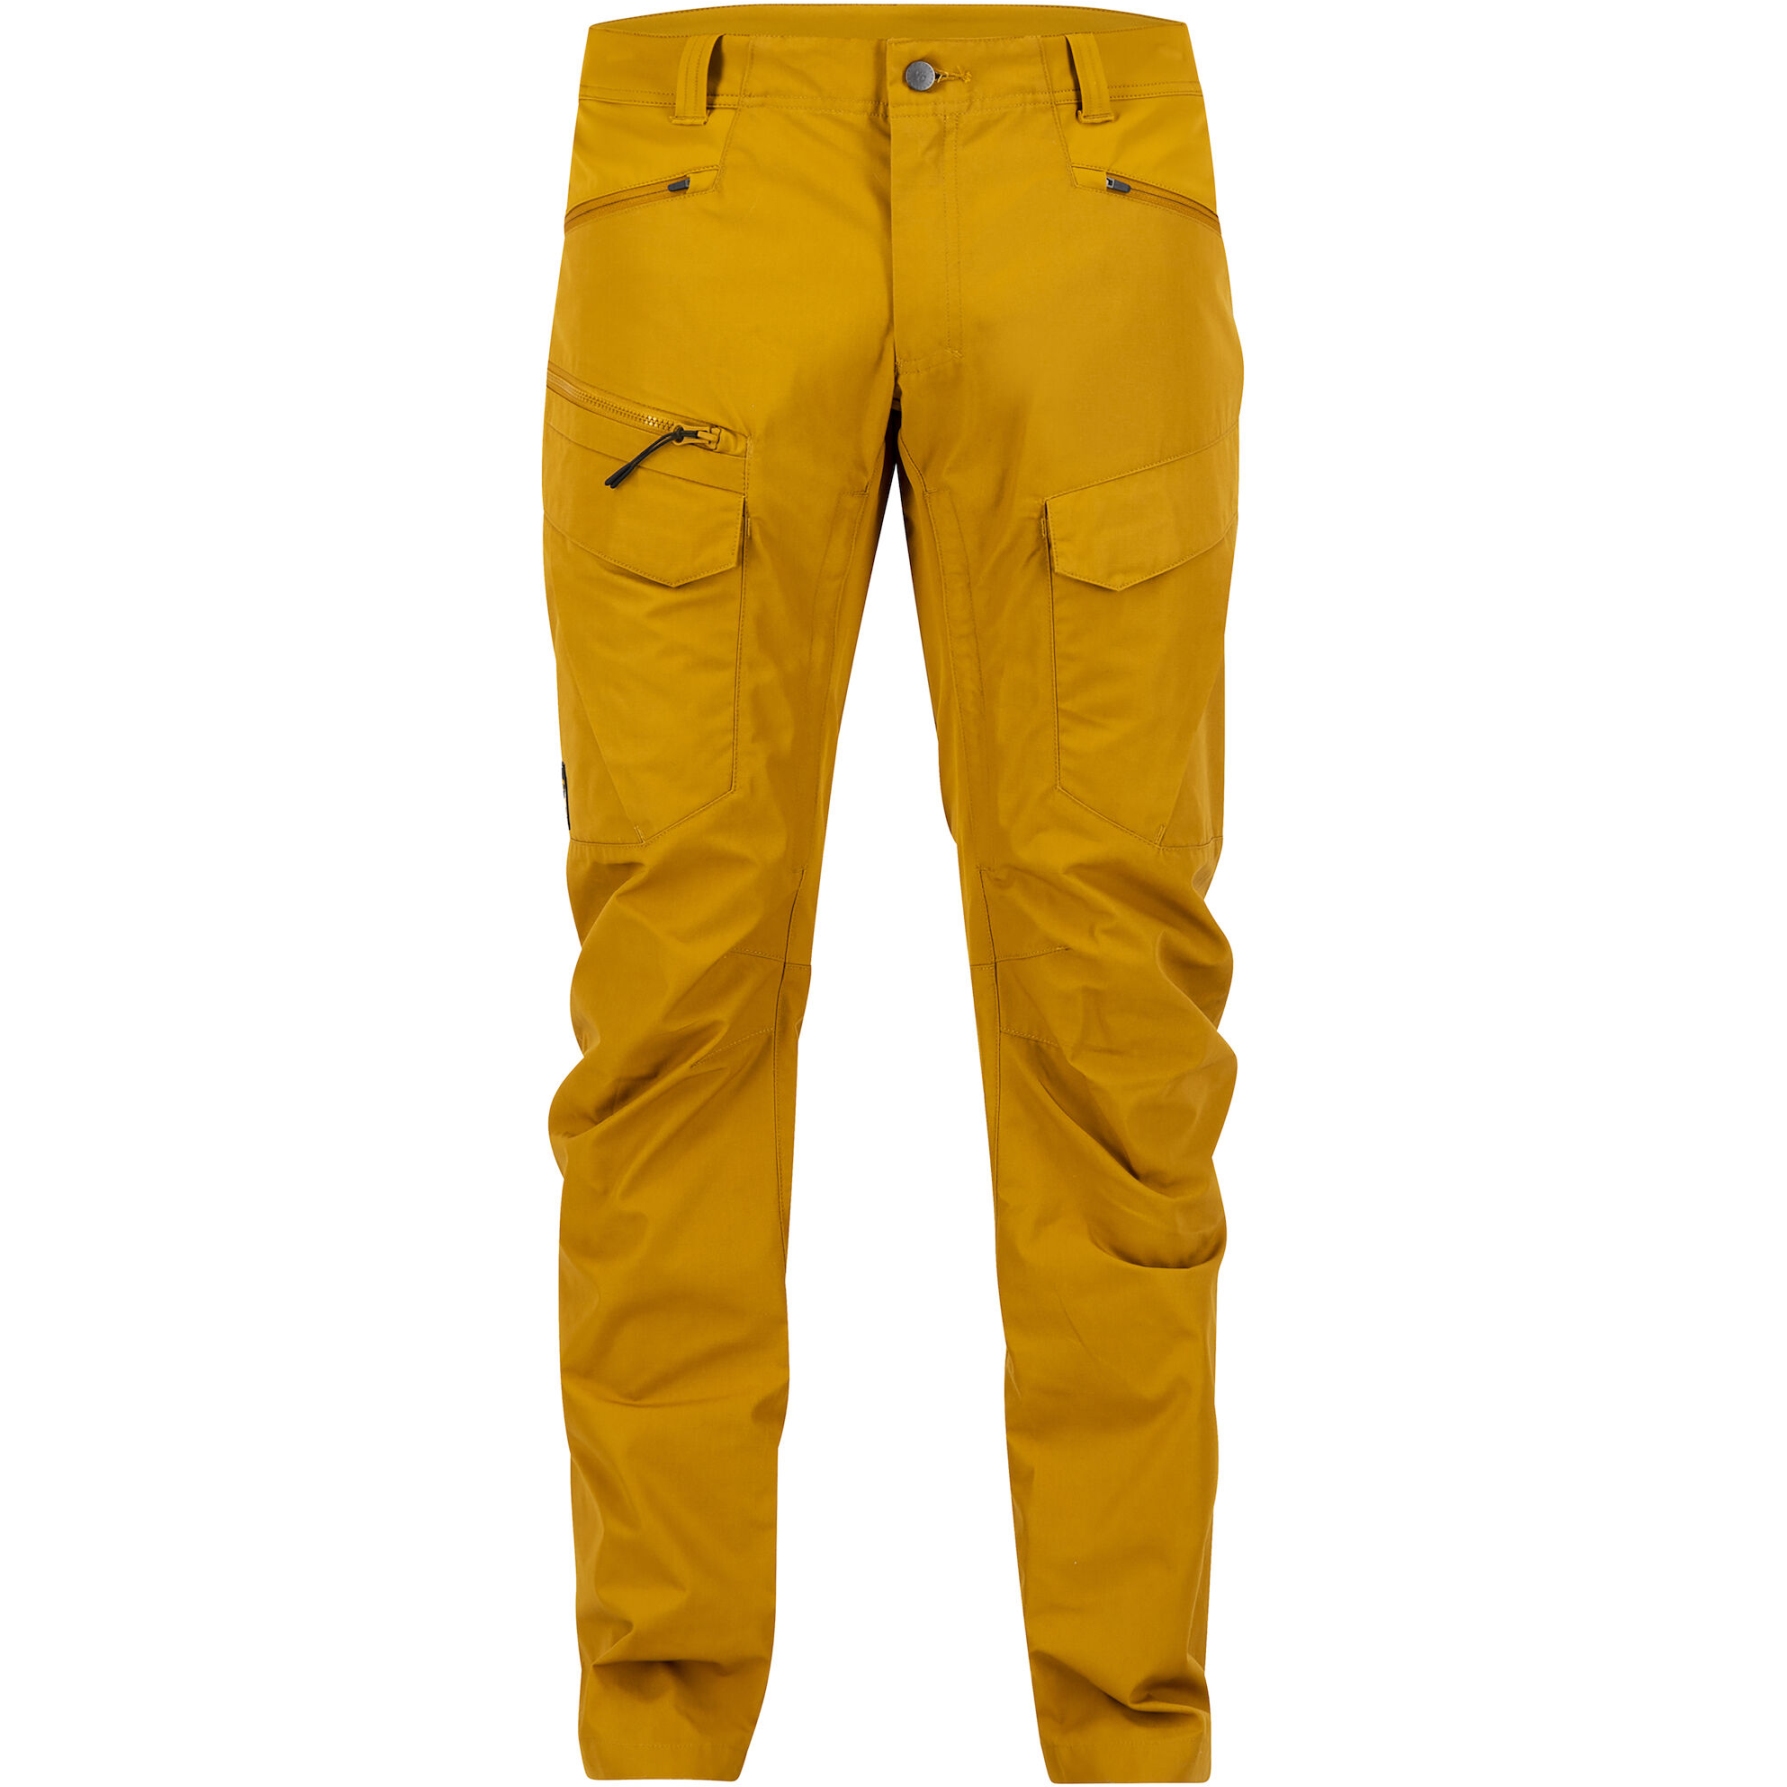 Picture of Lundhags Fulu Cargo Hiking Pants - Dark Gold 006